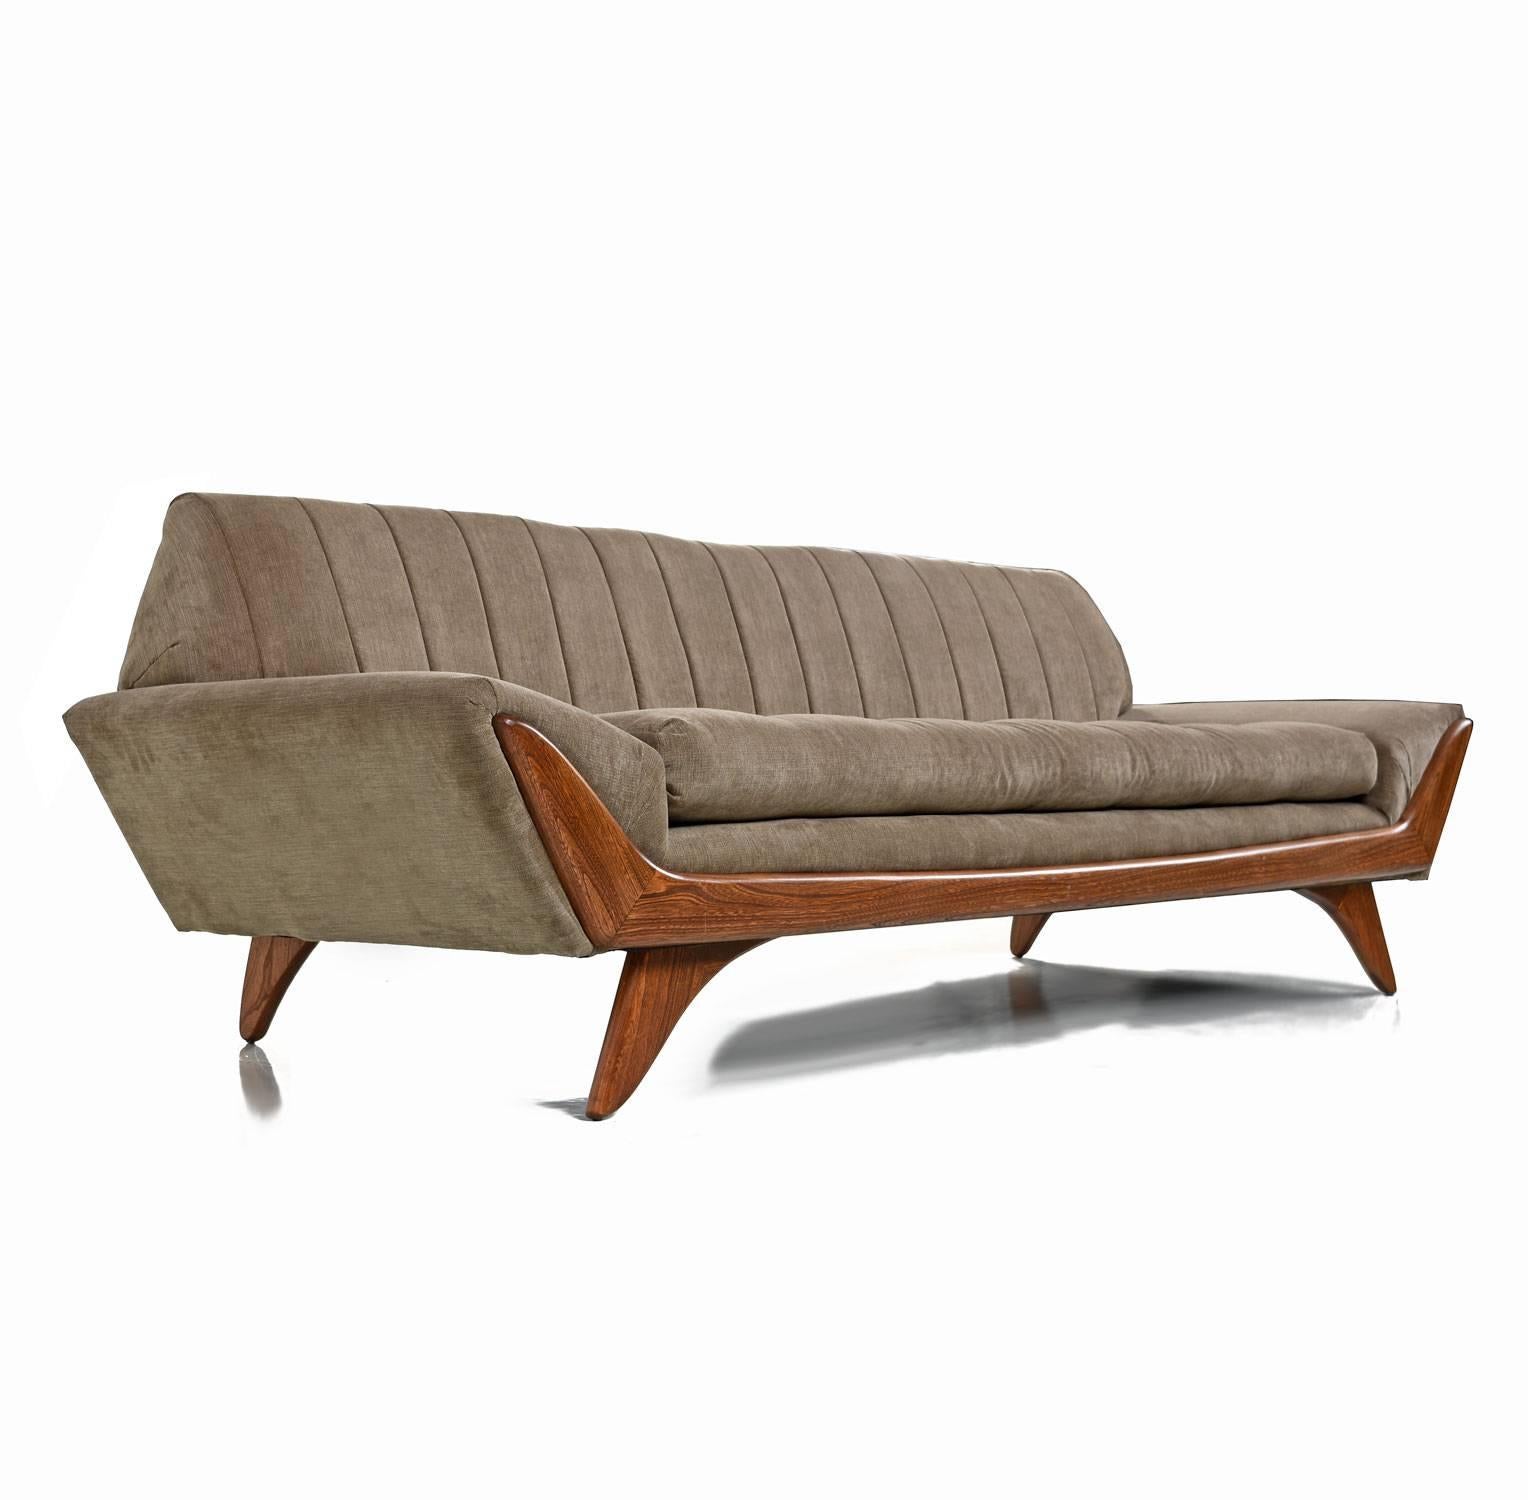 New fabric beautifully outfits this long Mid-Century Modern Adrian Pearsall sofa. Fantastic geometric profile. One of America's most celebrated designers of the period. Adrian Pearsall's ground breaking designs never cease to dazzle, even after a